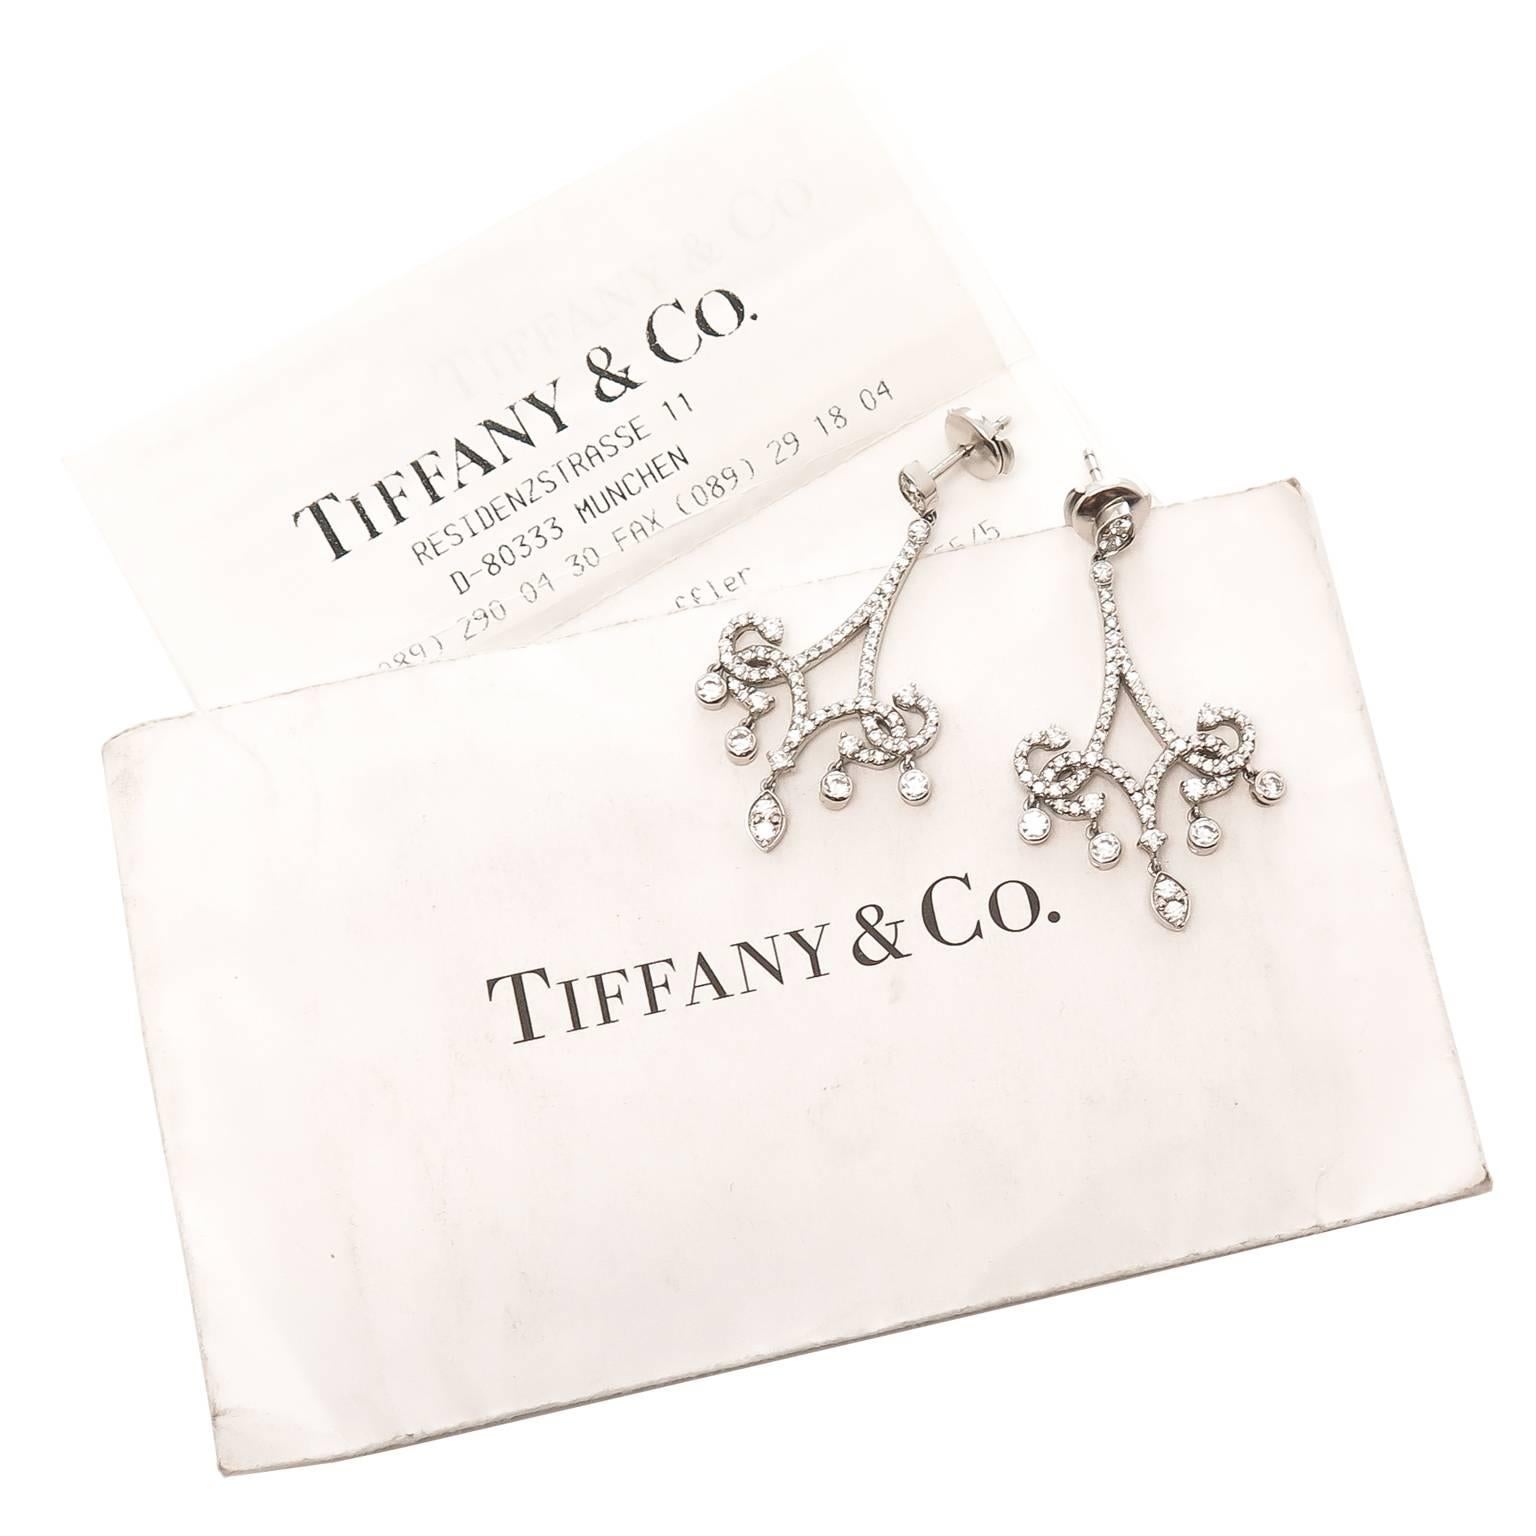 Circa 2012 Tiffany & Co. Platinum Scroll Earrings, set with round Brilliant cut Diamonds that are fine white F-G color and VVS Clarity and total 1.45 carat. Measuring 1 3/4 inch in length, 7/8 inch wide and having dangling bottom sections. Post